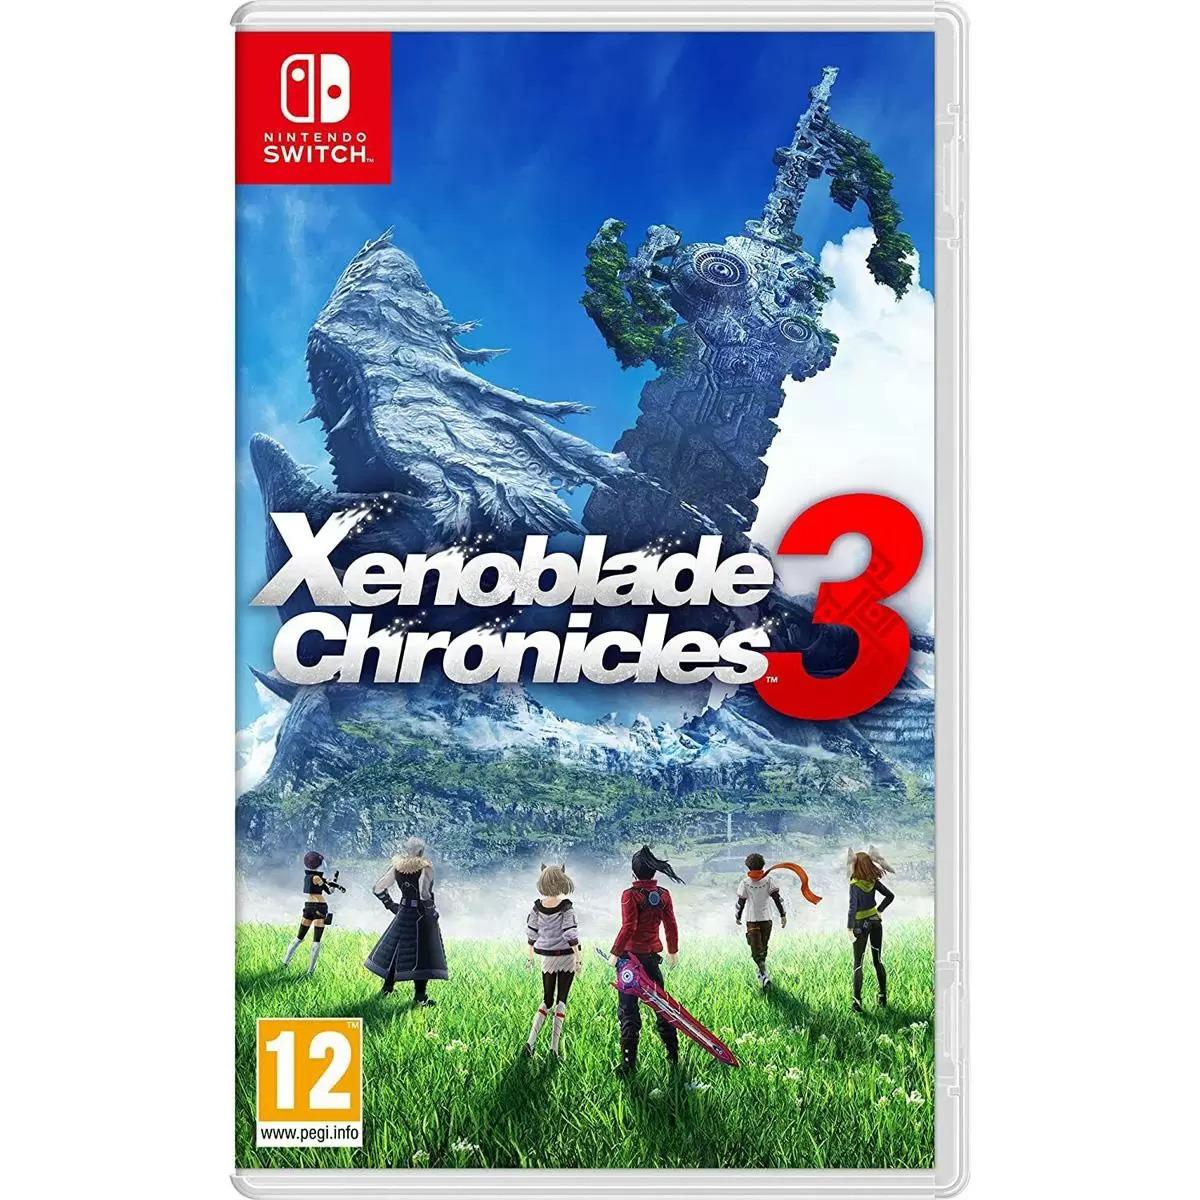 Xenoblade Chronicles 3 Nintendo Switch for $45.04 Shipped